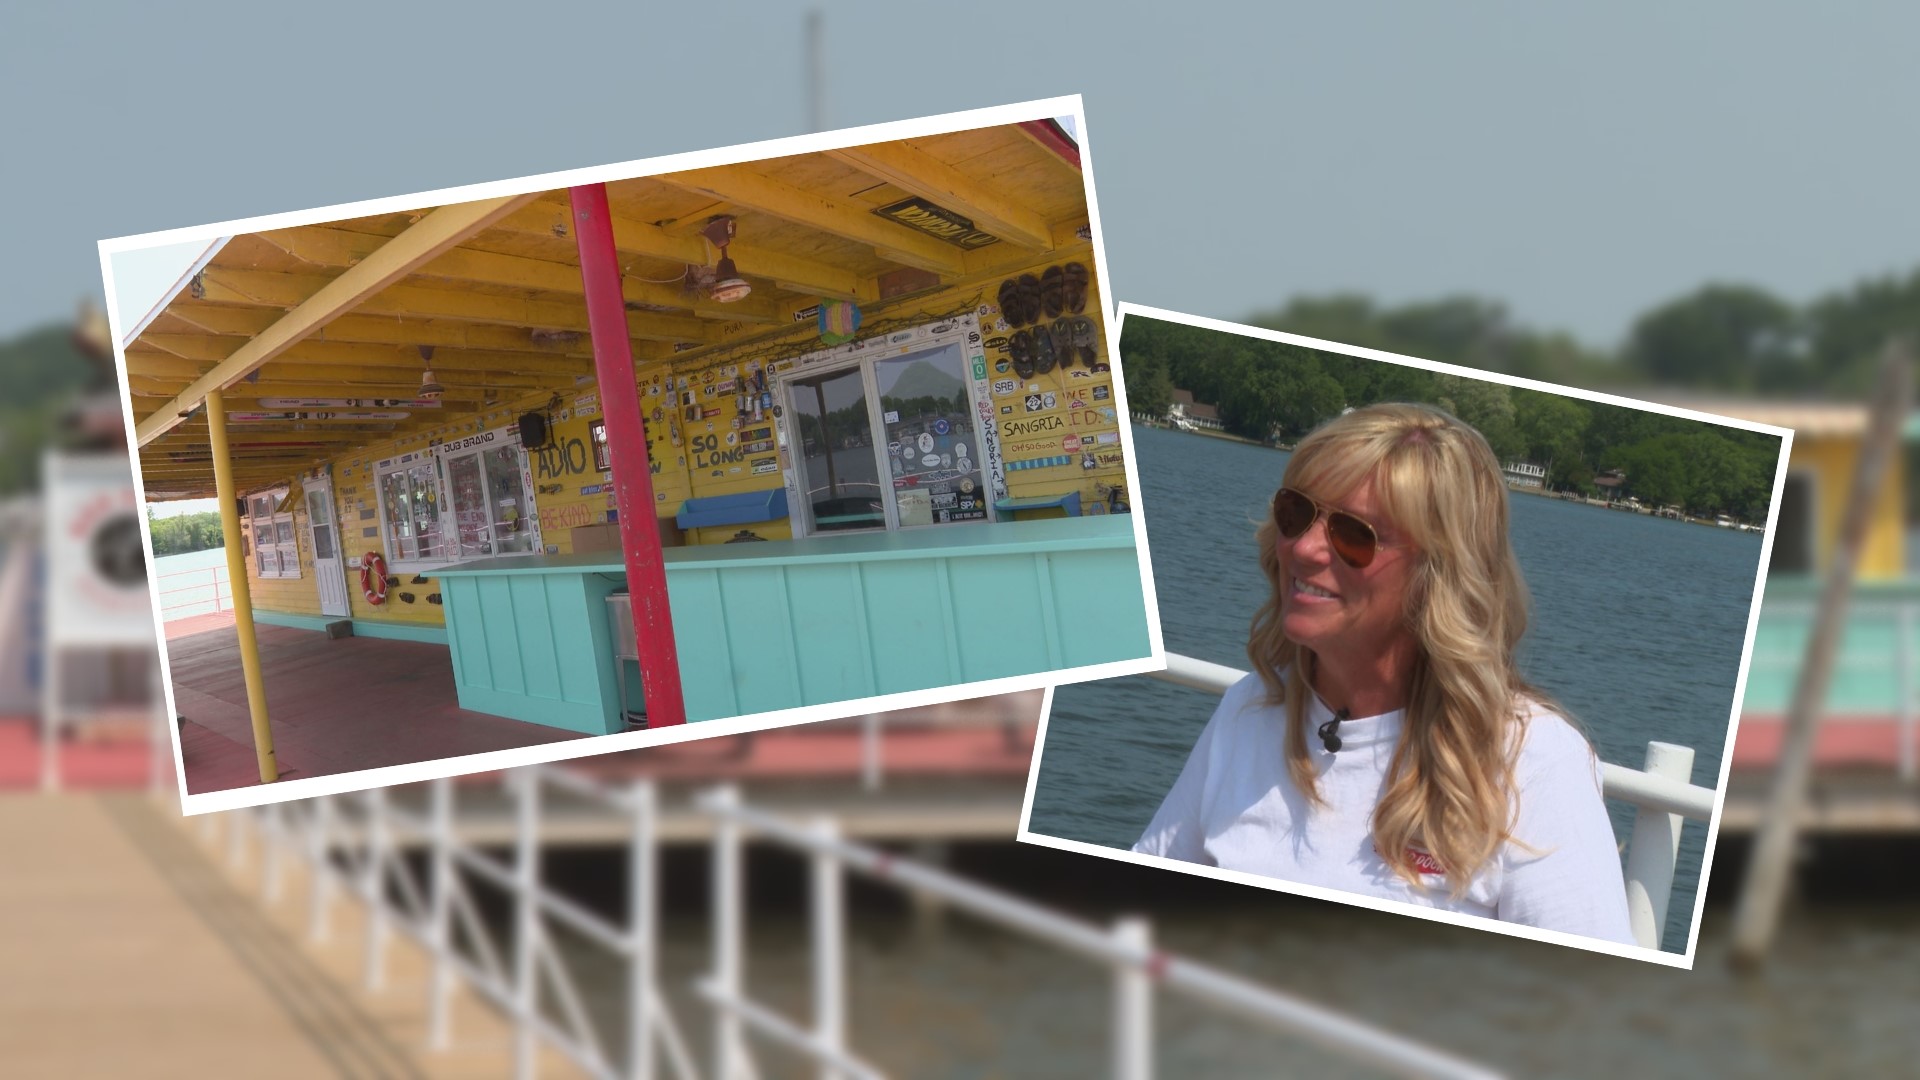 The iconic Saugatuck restaurant and bar draws crowds every weekend. A former 13 ON YOUR SIDE Anchor and her husband took over — and here's the one change they made.